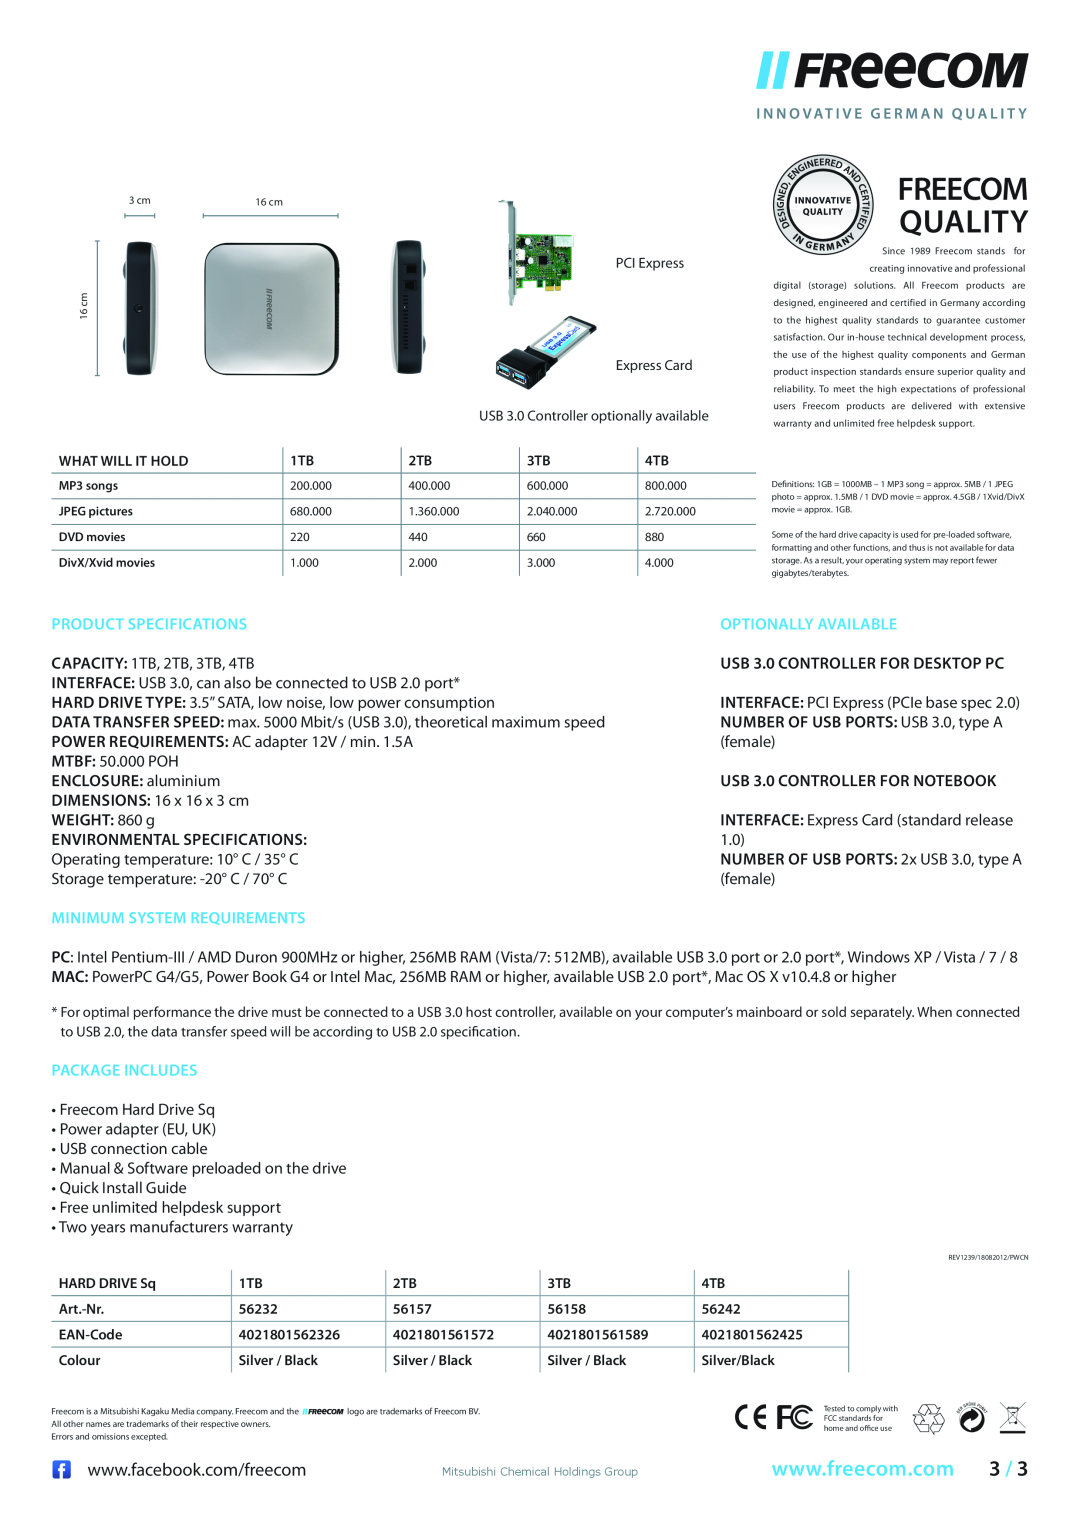 Freecom Technologies 97805 Product Specifications, Optionally Available, Minimum System Requirements, Package Includes 